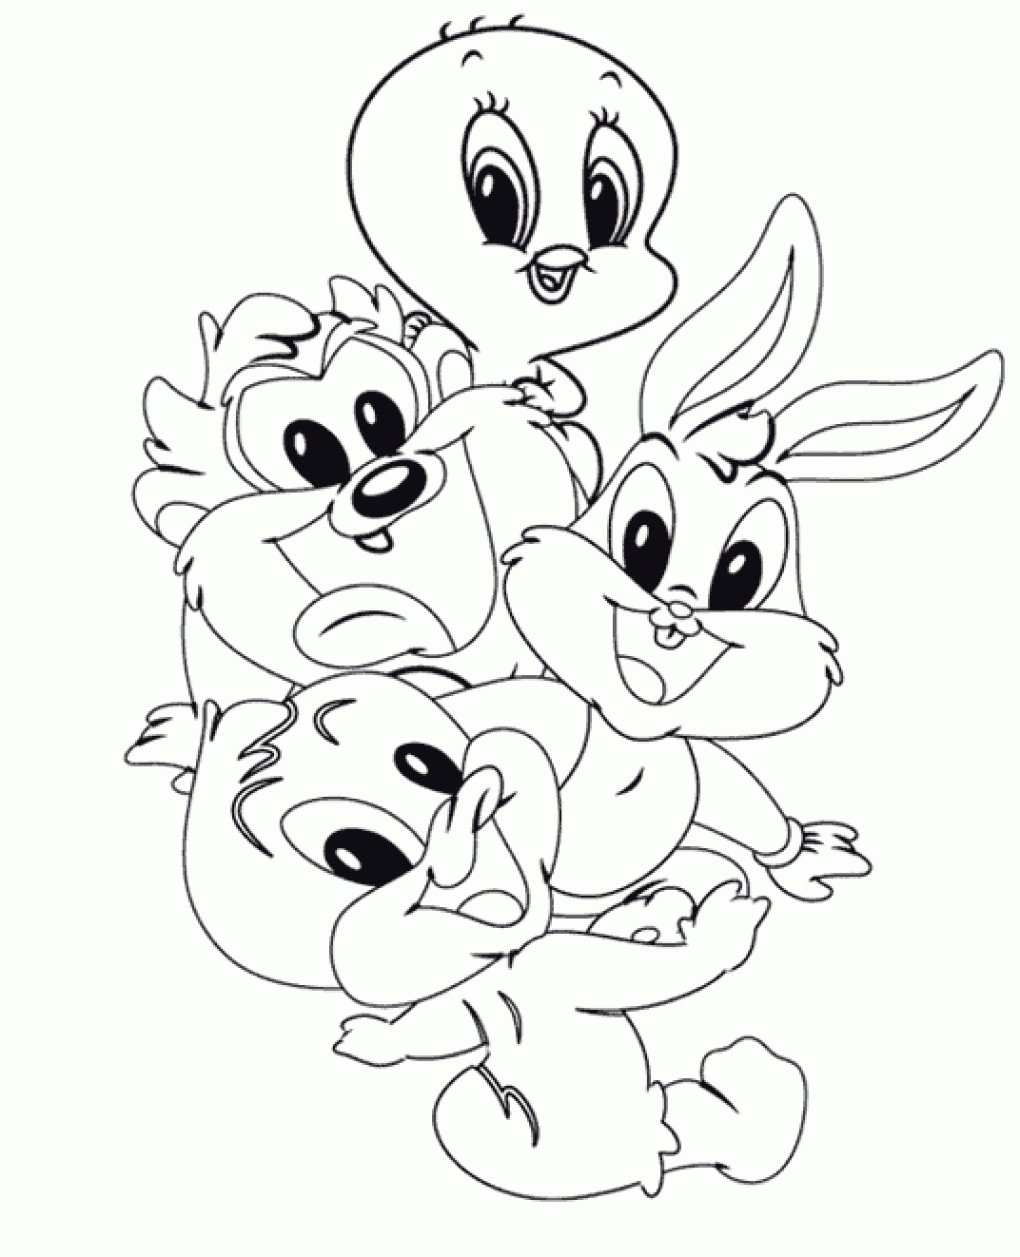 Looney Tunes Printable Coloring Pages - Coloring Page Photos